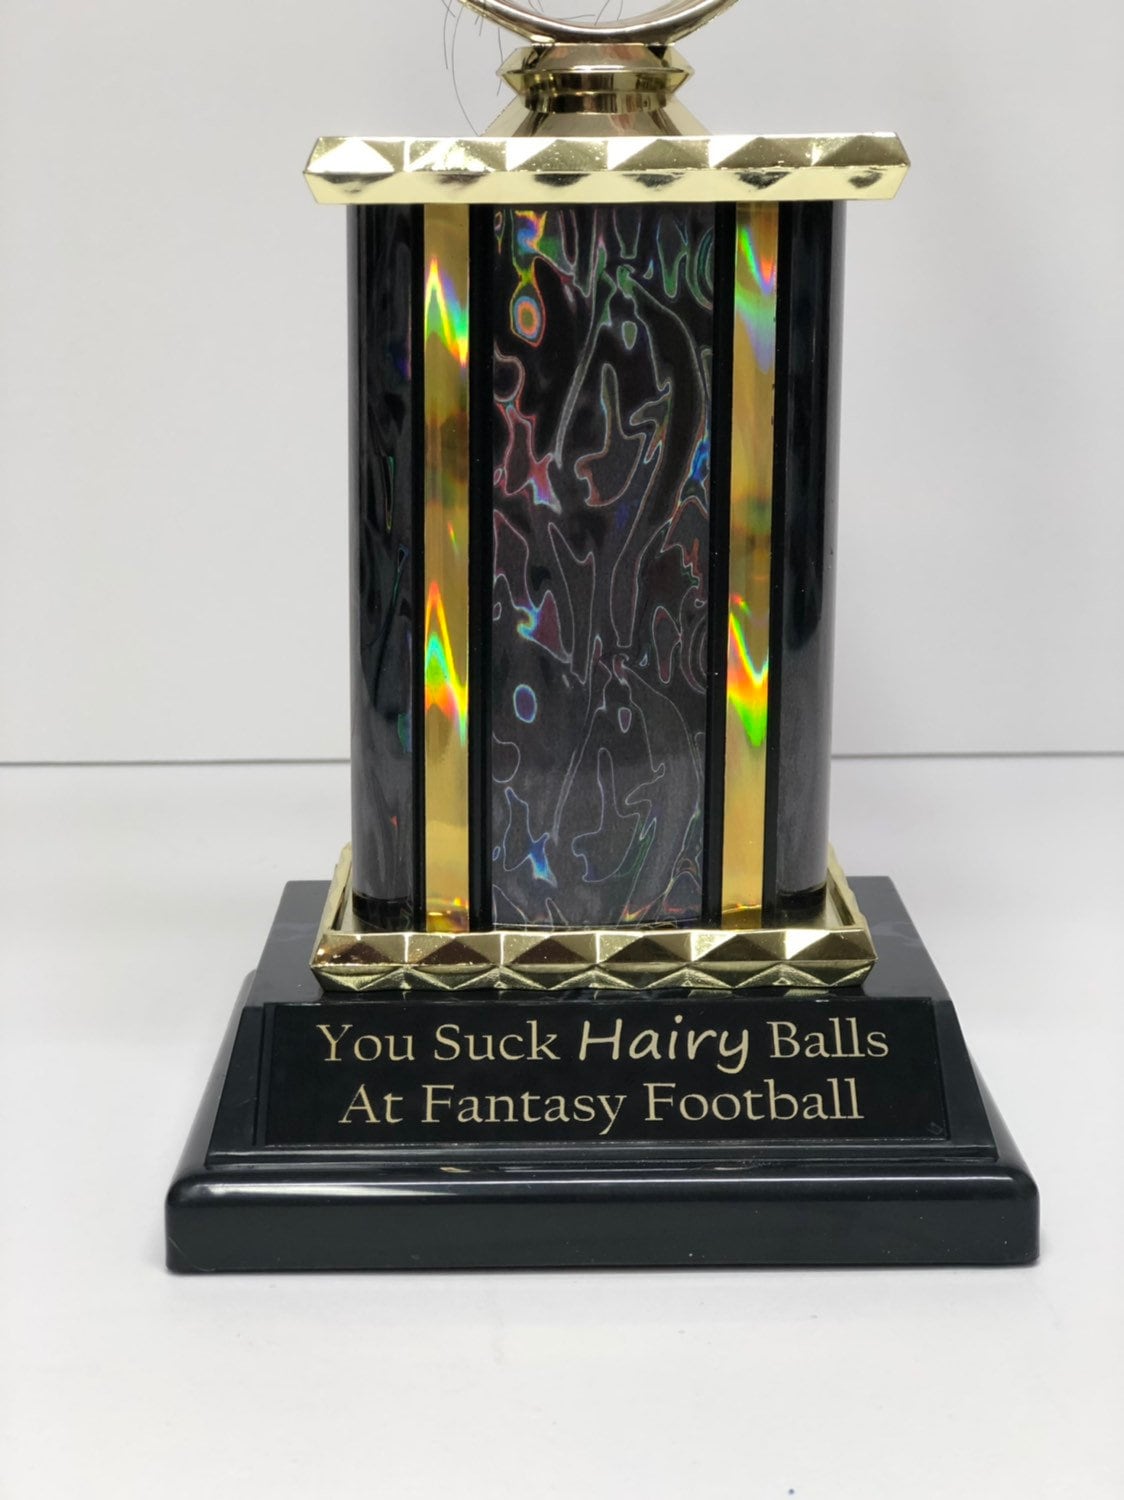 Fantasy Football HAIRY Balls Sacko Loser Trophy Last Place FFL Trophy You Suck HAIRY Balls Funny Trophy Adult Humor Gag Gift Testicle